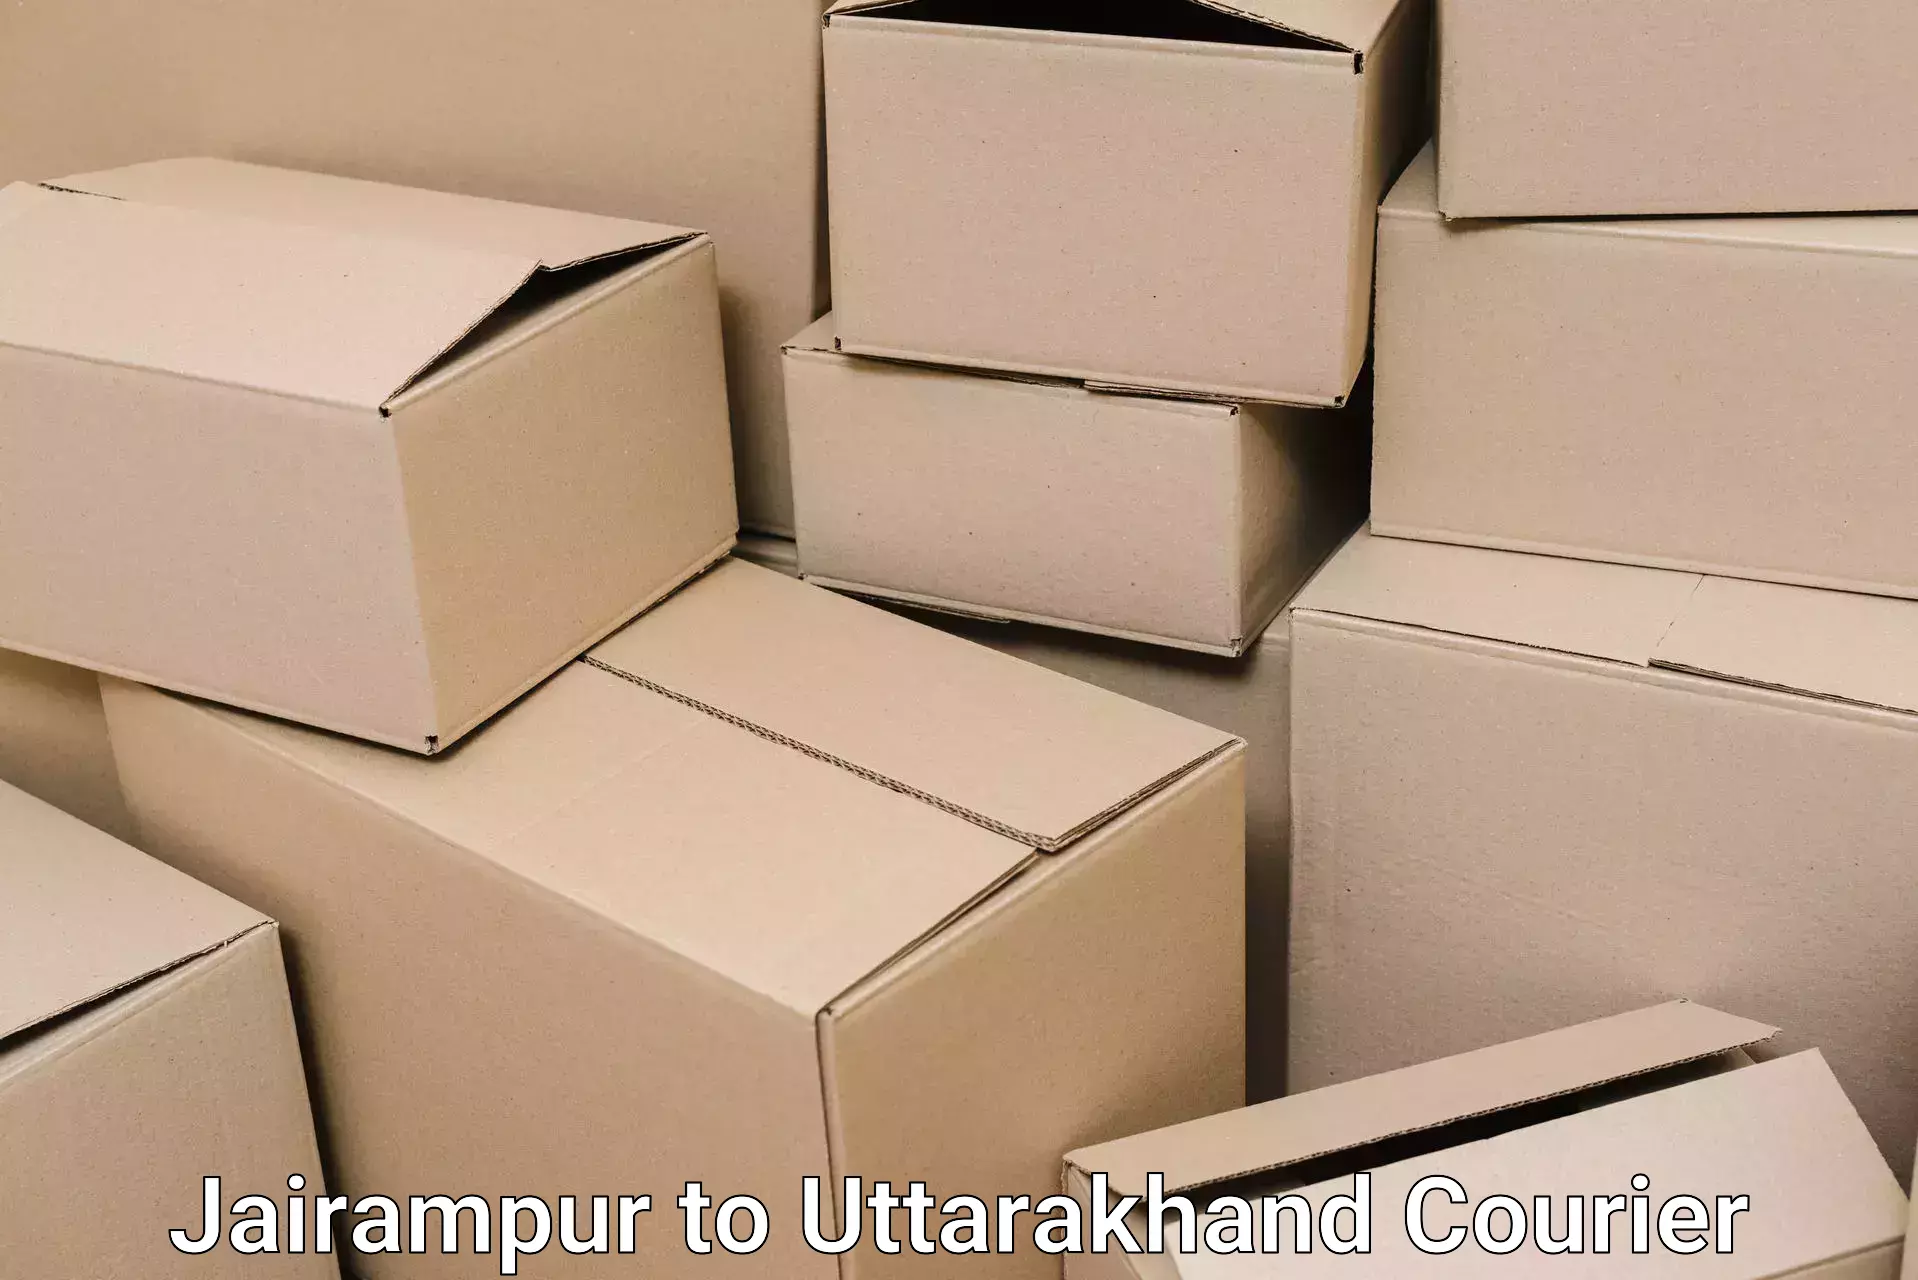 Trusted relocation services in Jairampur to Uttarakhand